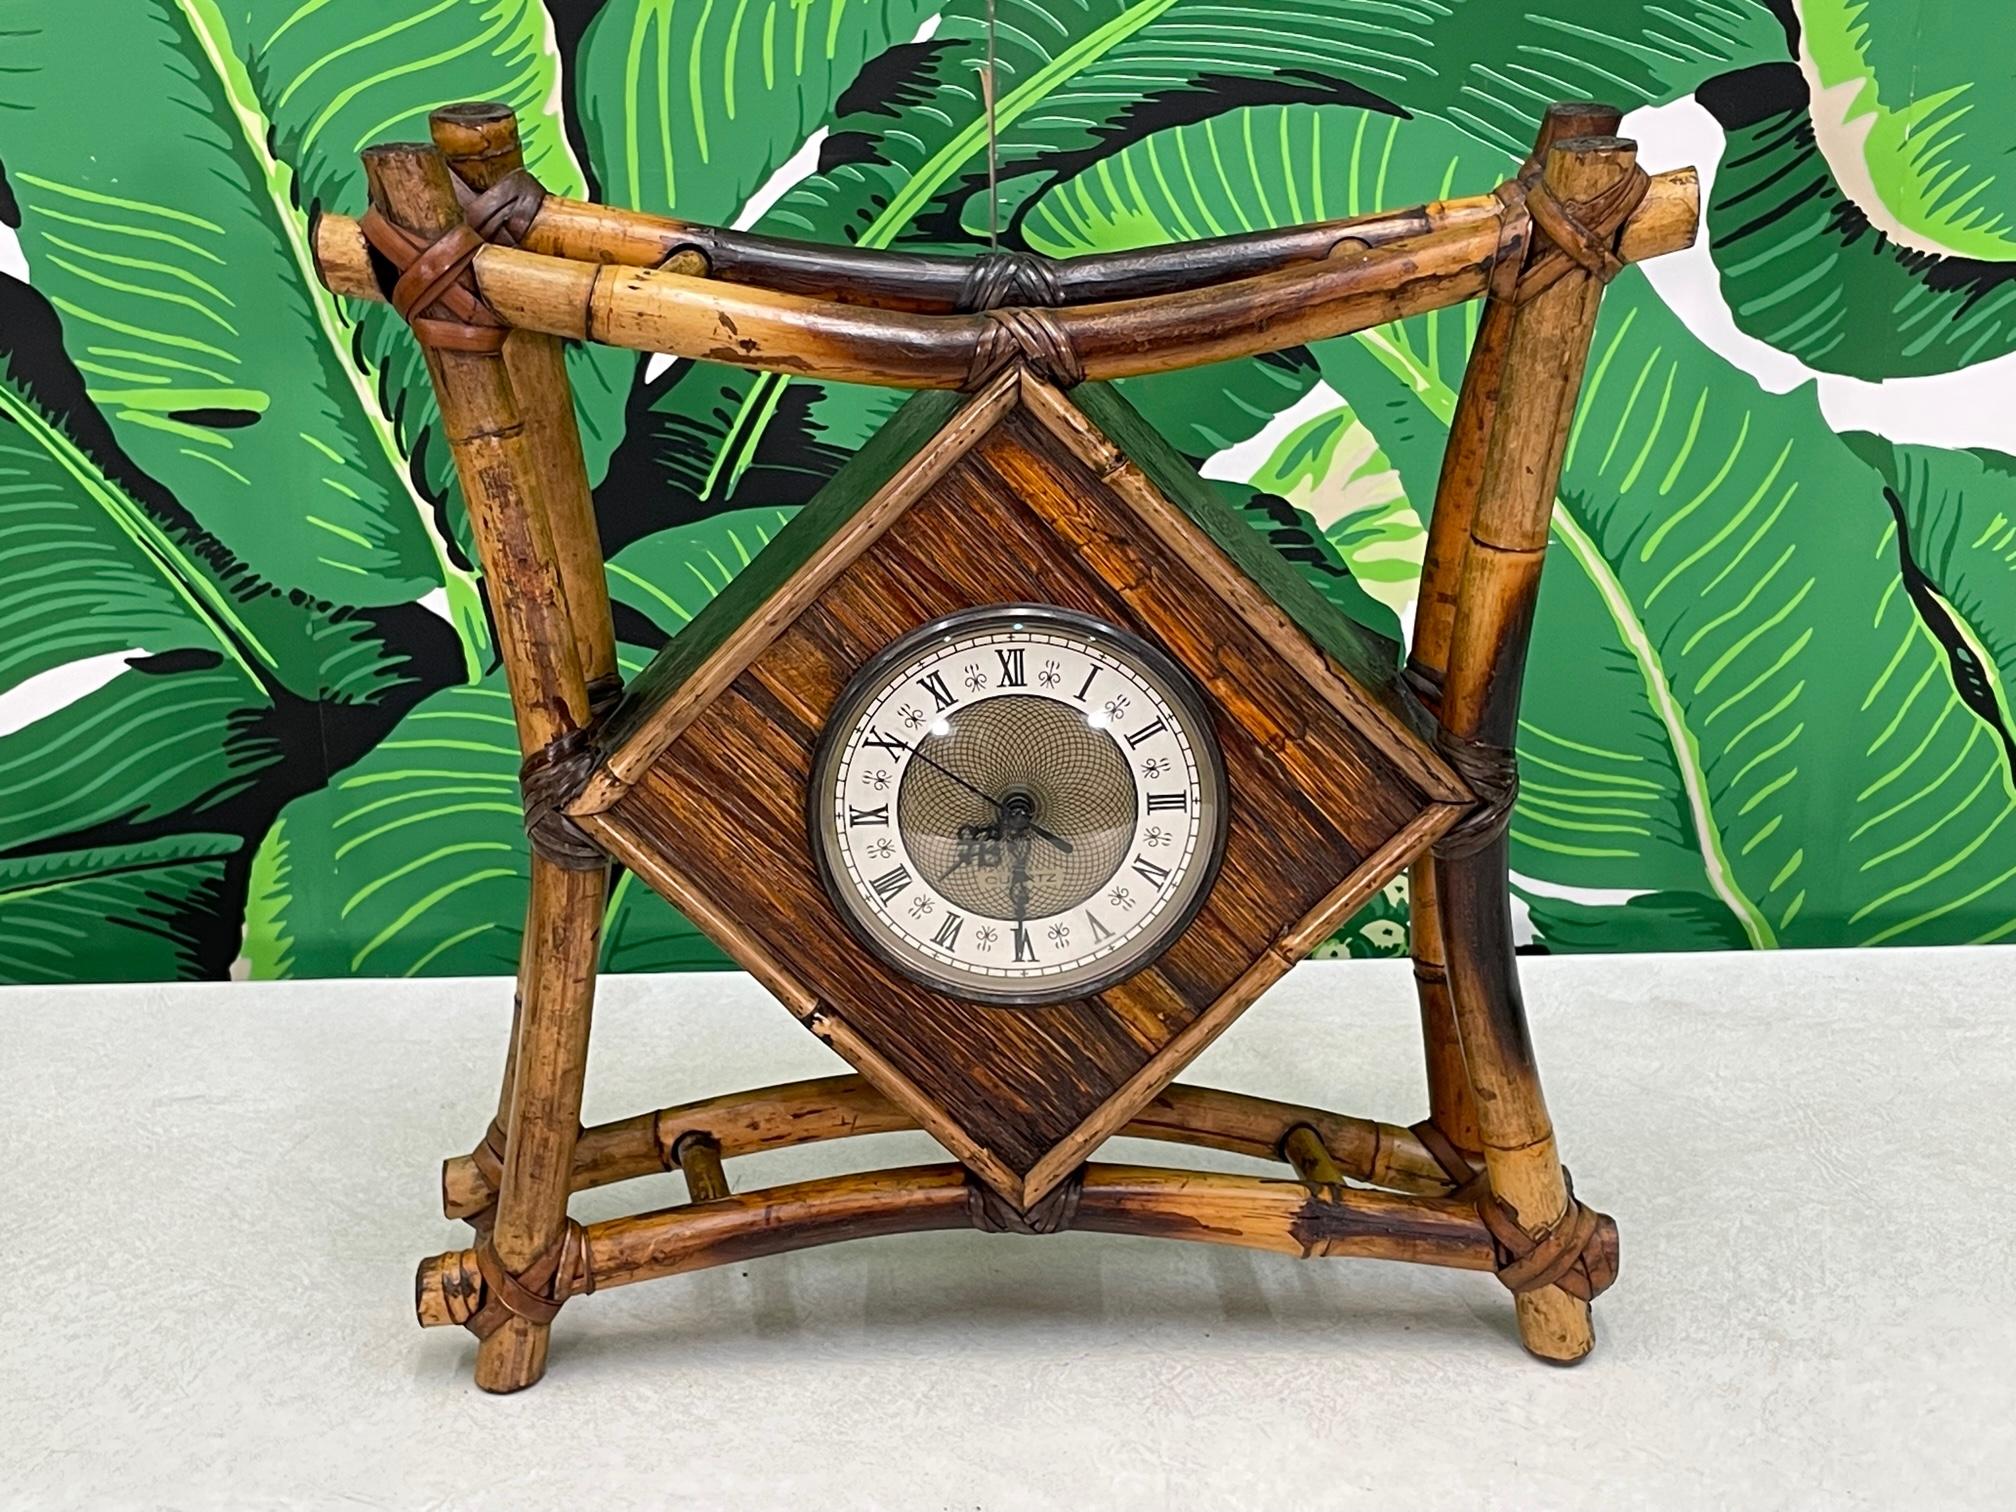 Tiki style wall or desk clock features a rattan (solid bamboo) frame lashed with leather bindings. Battery operated, takes one AA battery. Good condition with minor imperfections consistent with age, see photos for condition details.

